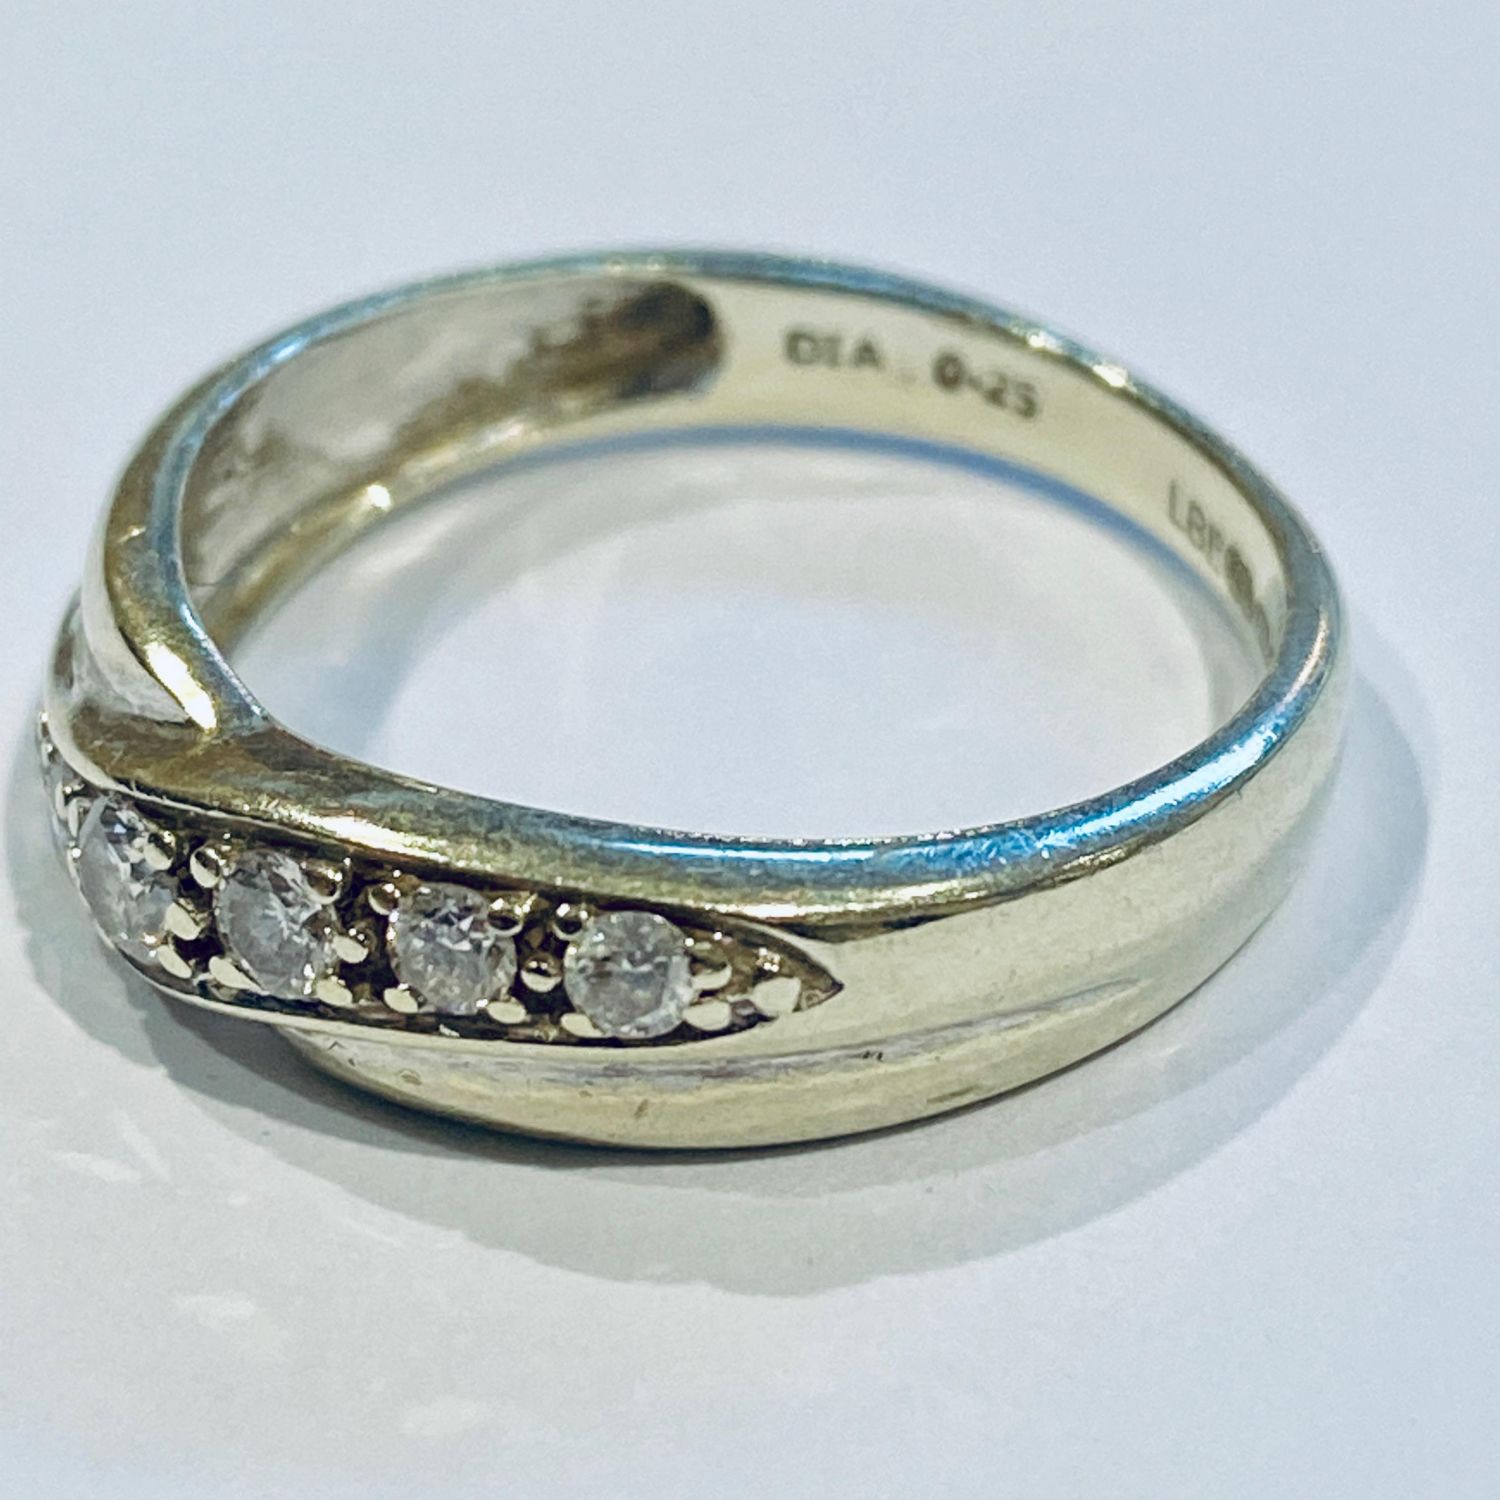 Vintage 9ct White Gold Diamond Ring - Jewellery & Gold - Hemswell ...